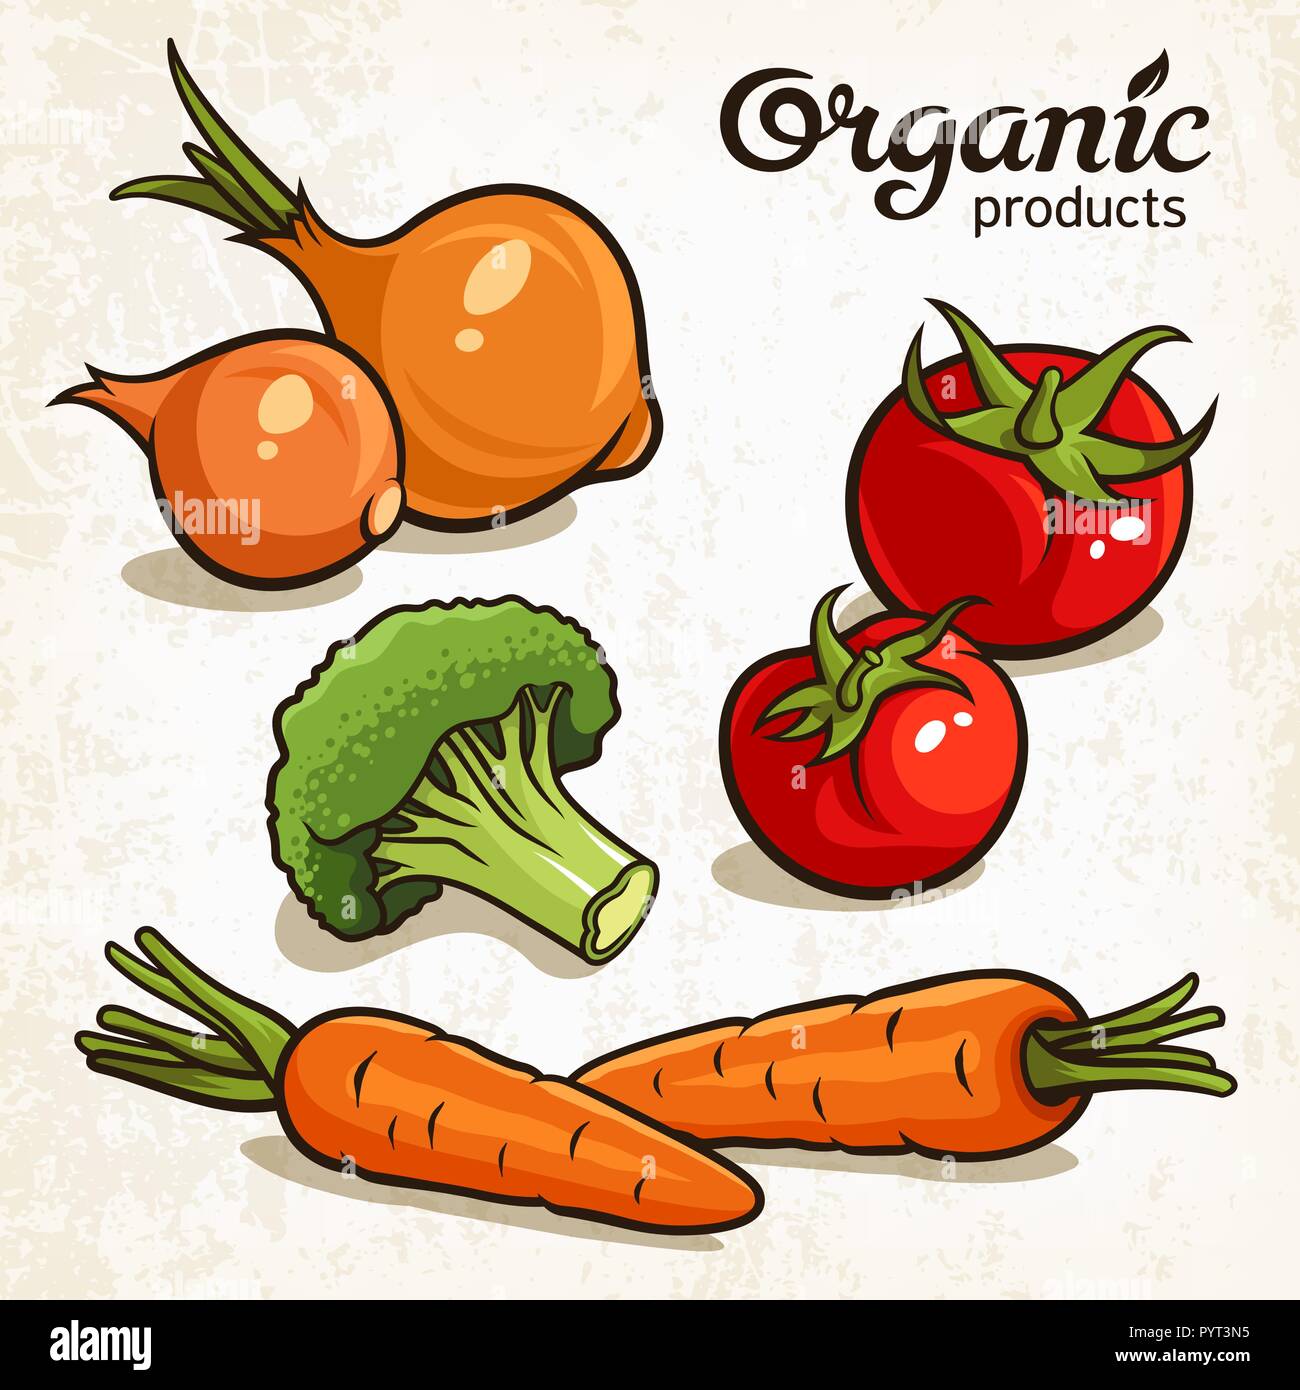 Vector illustration of vegetables: carrot, onion, tomatoes, broccoli Stock Vector